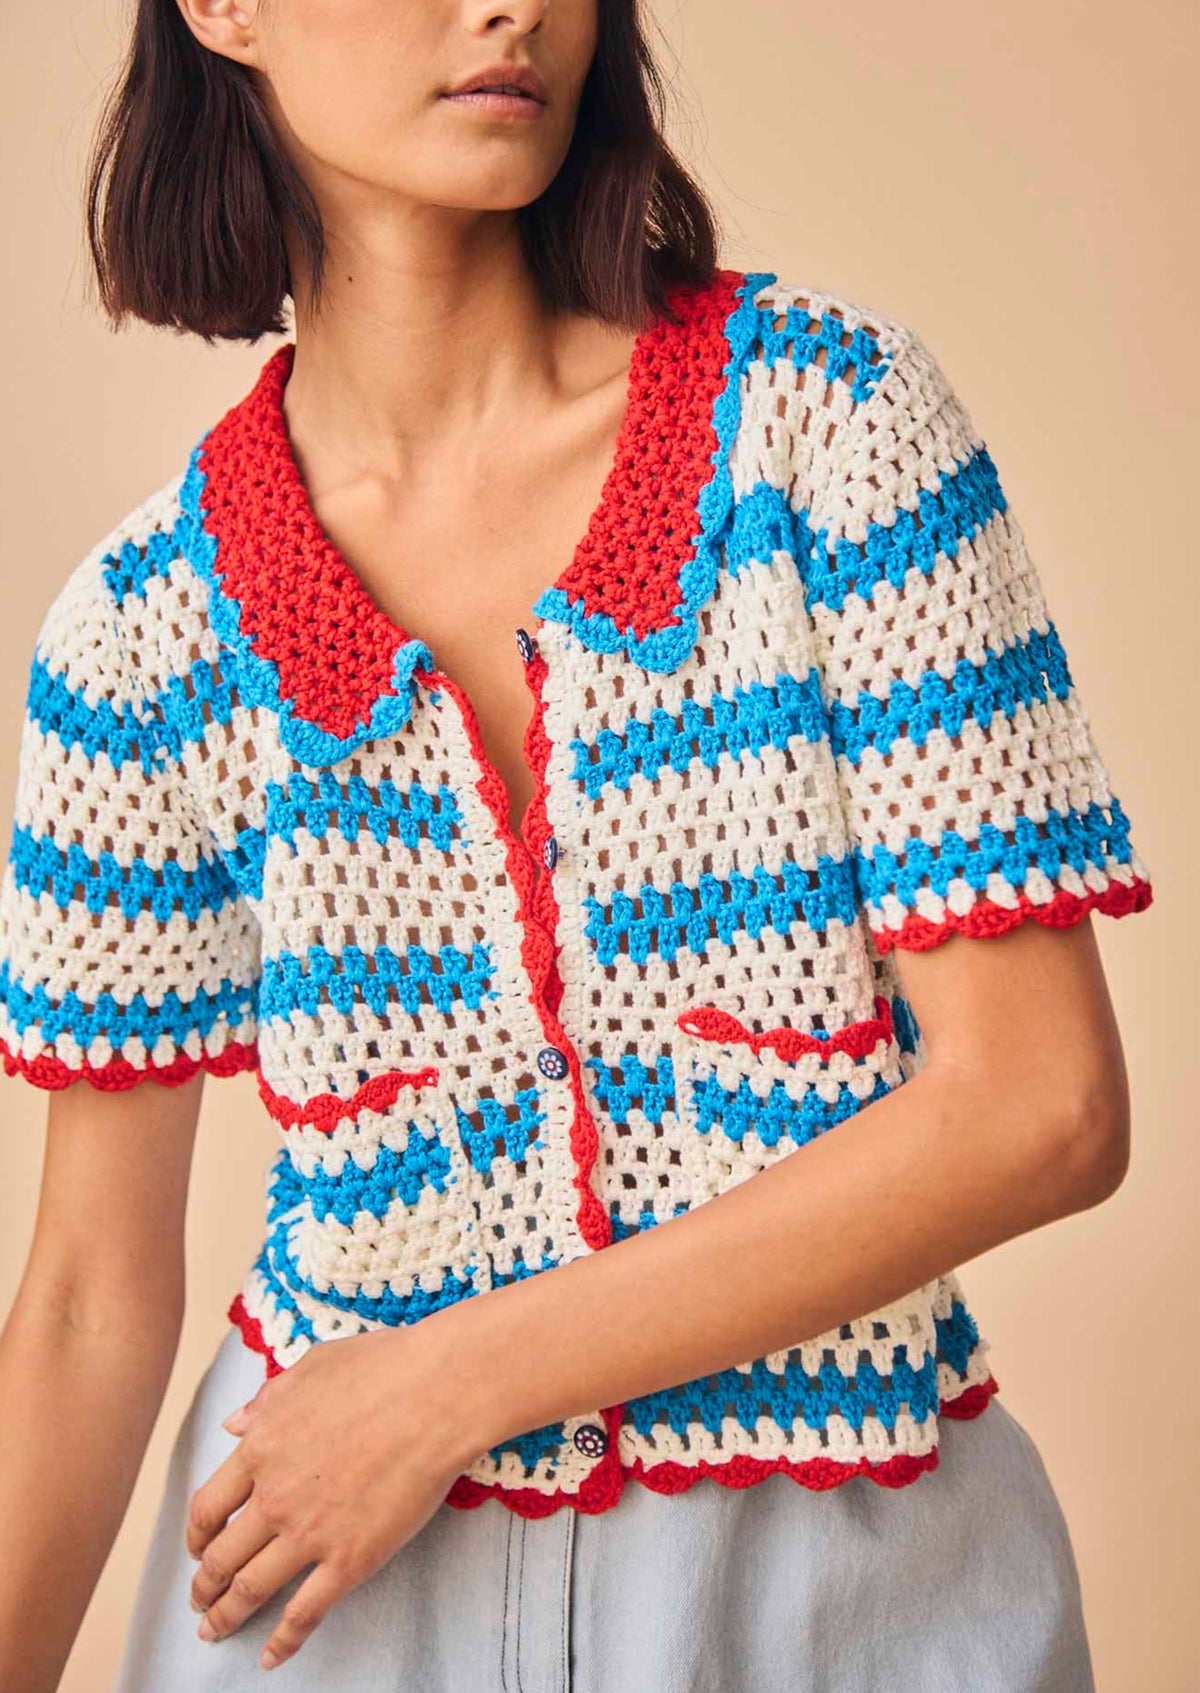 The Kate crochet Top has a contrast collar neckline, scalloped edges and colorful novelty buttons.